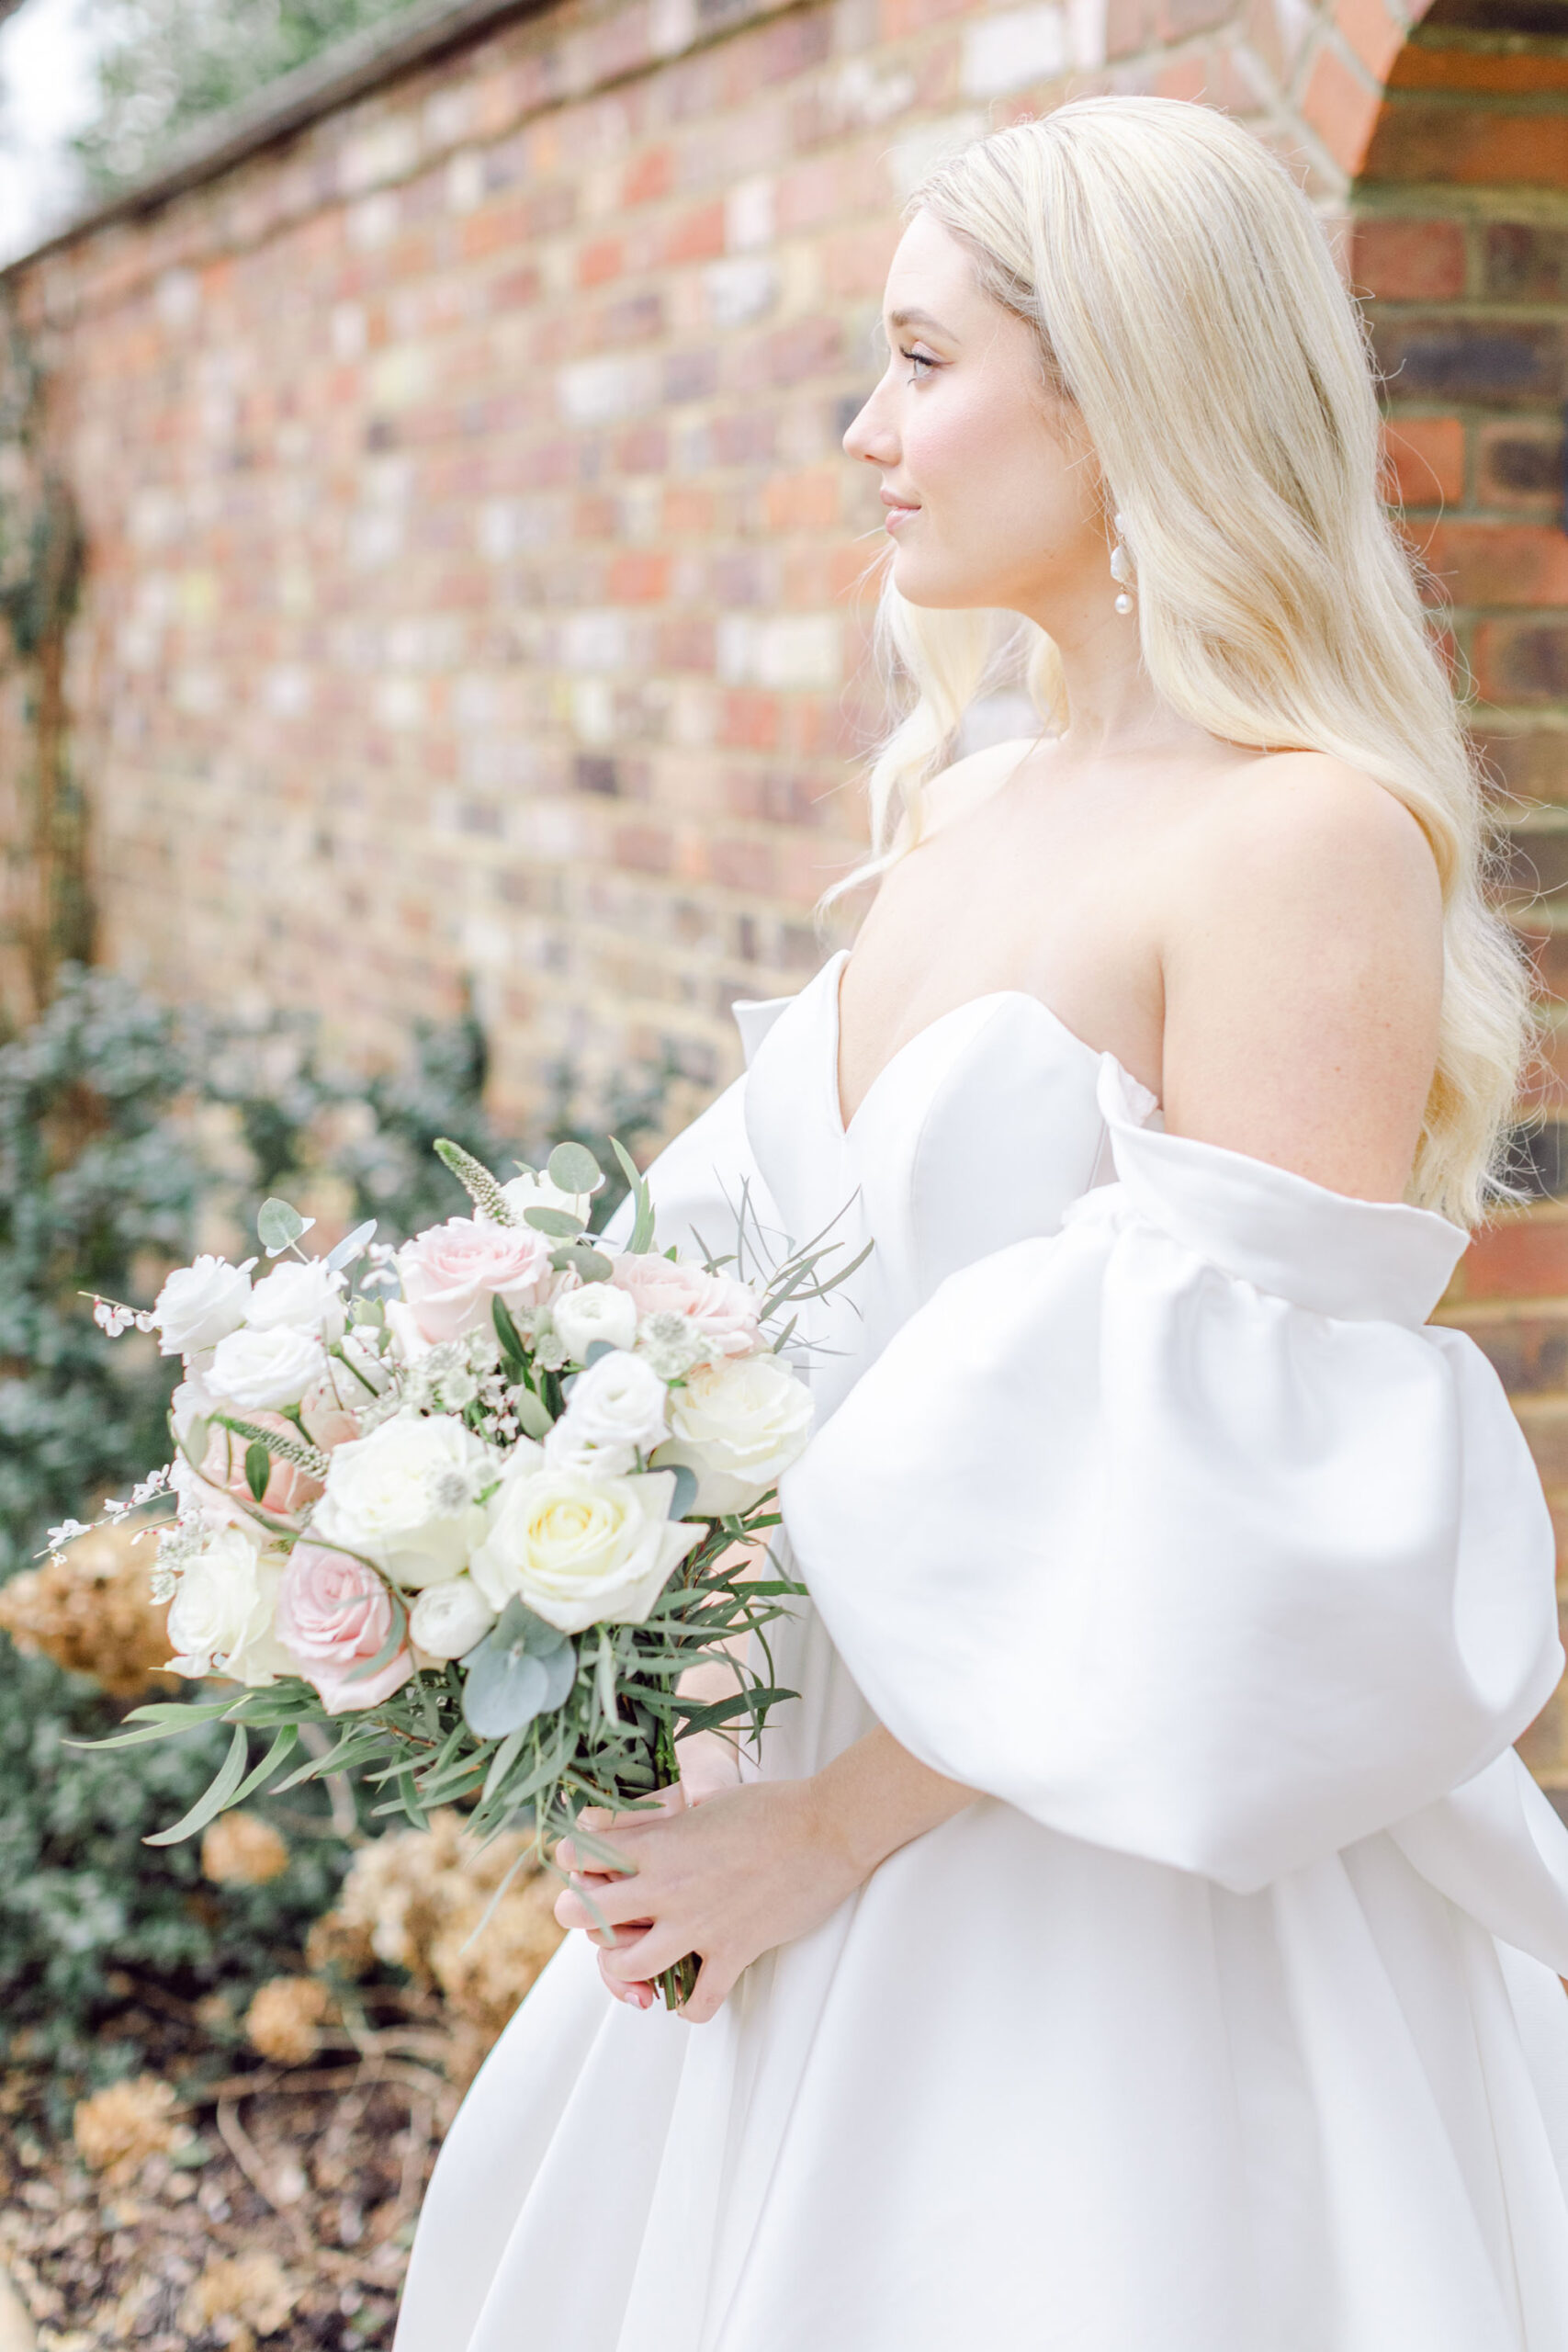 Light and airy fine art photography at Greentrees Estate. Our model bride wears an off the shoulder dress by Lyn Ashworth. Flowers are white and blush British botanicals. Image credit Natalie D Photography